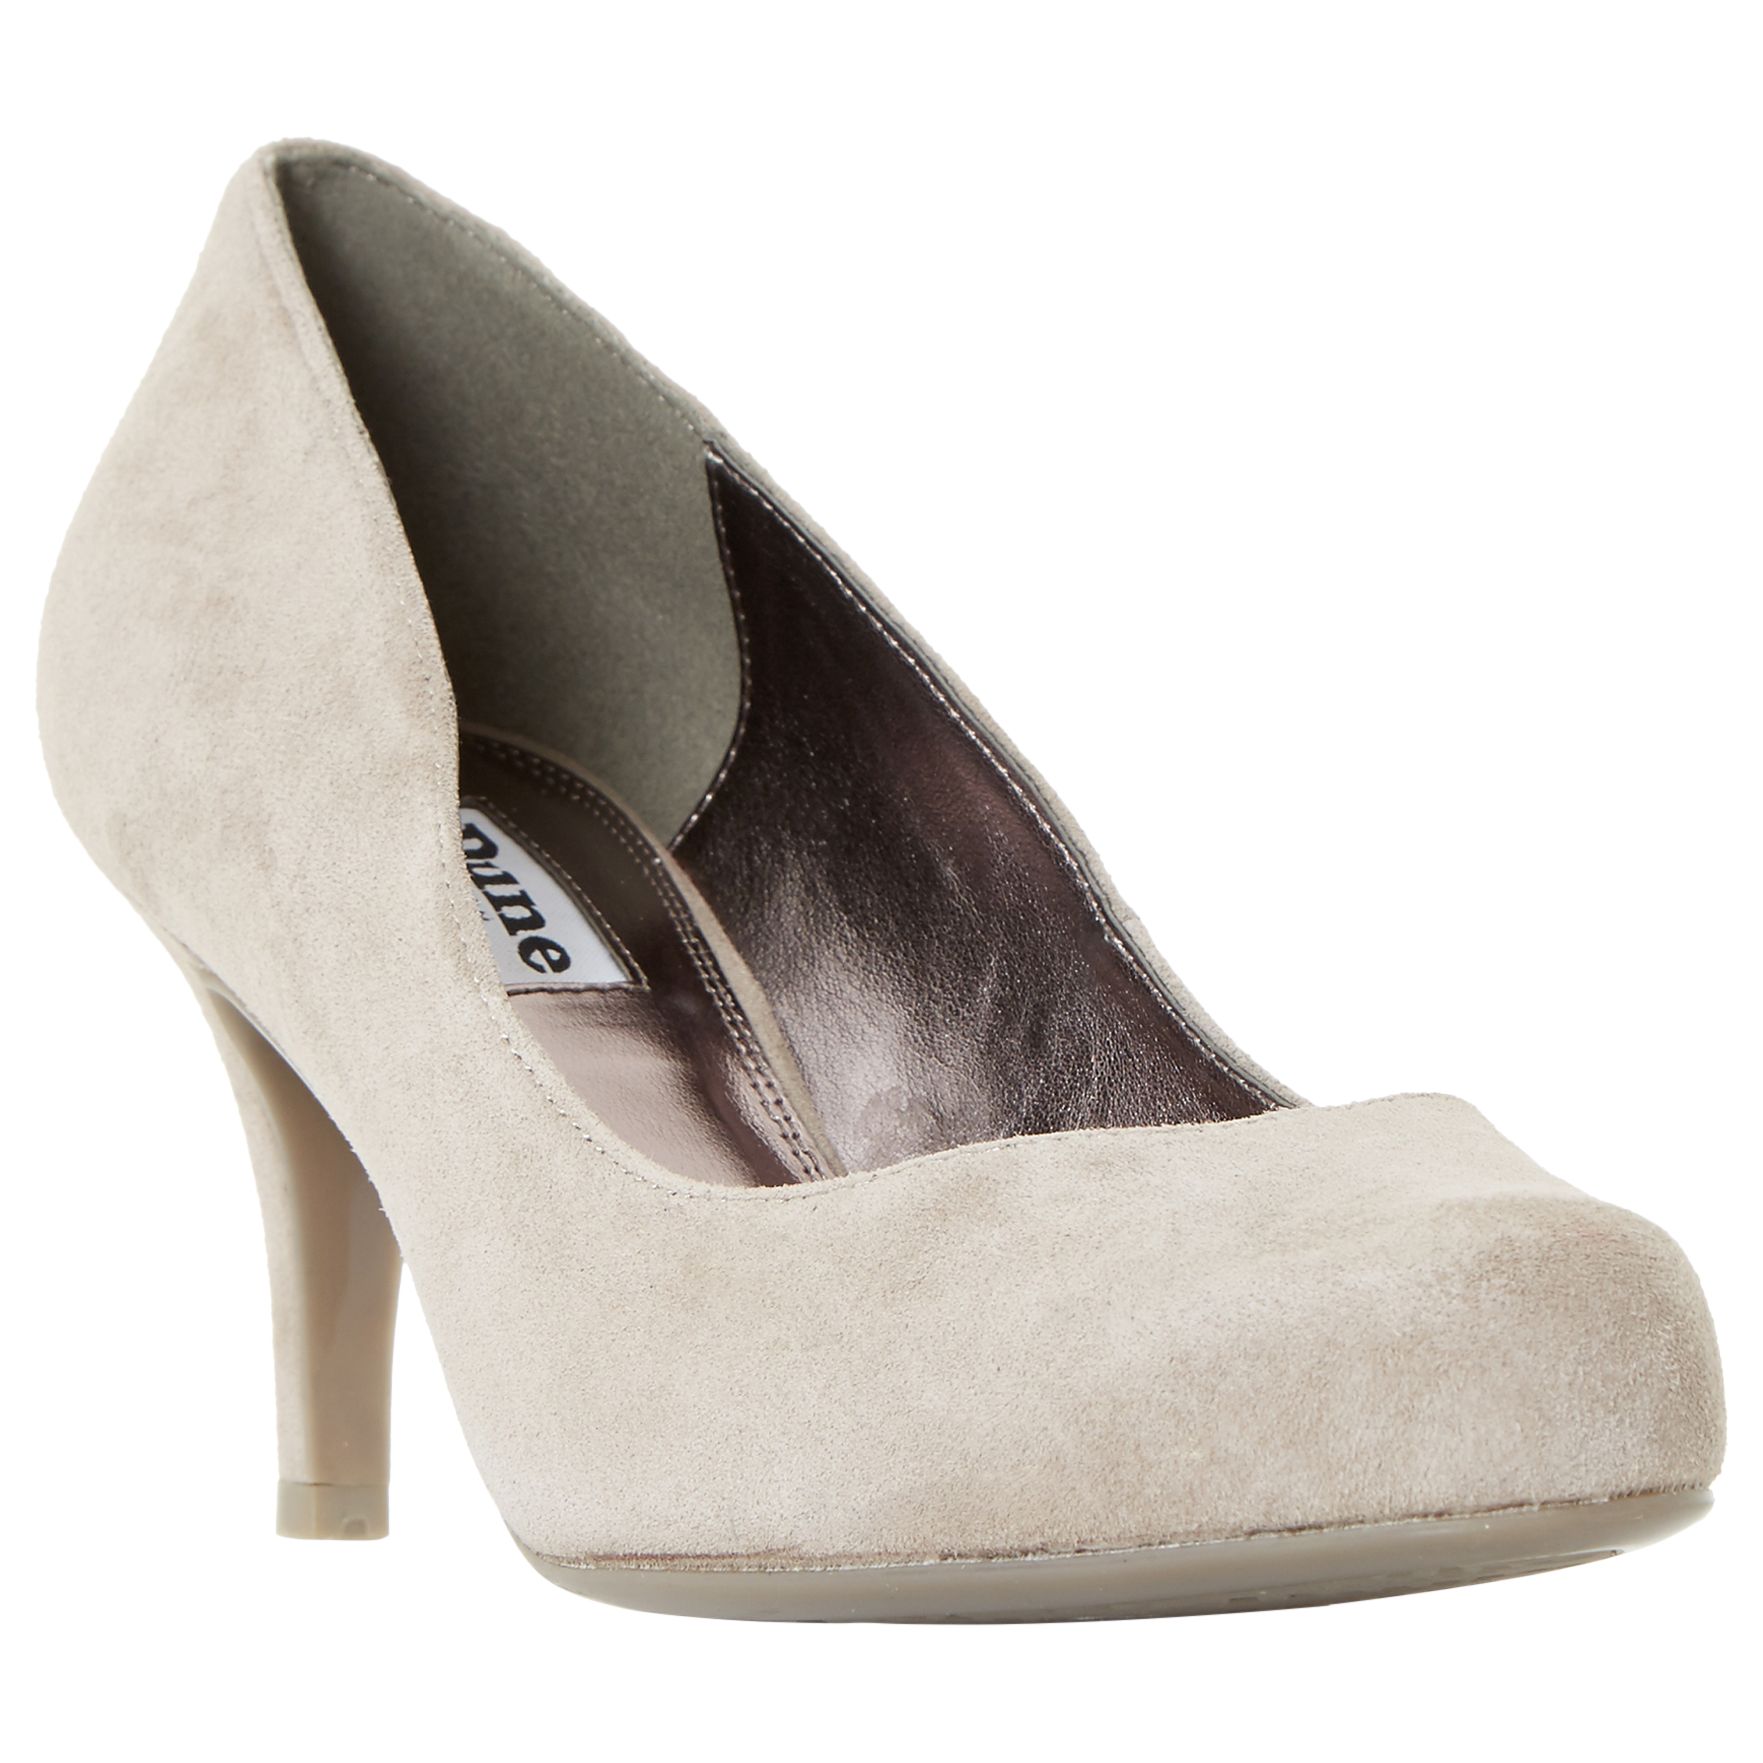 Dune Amelia Stiletto Heeled Court Shoes, Taupe Suede, 3